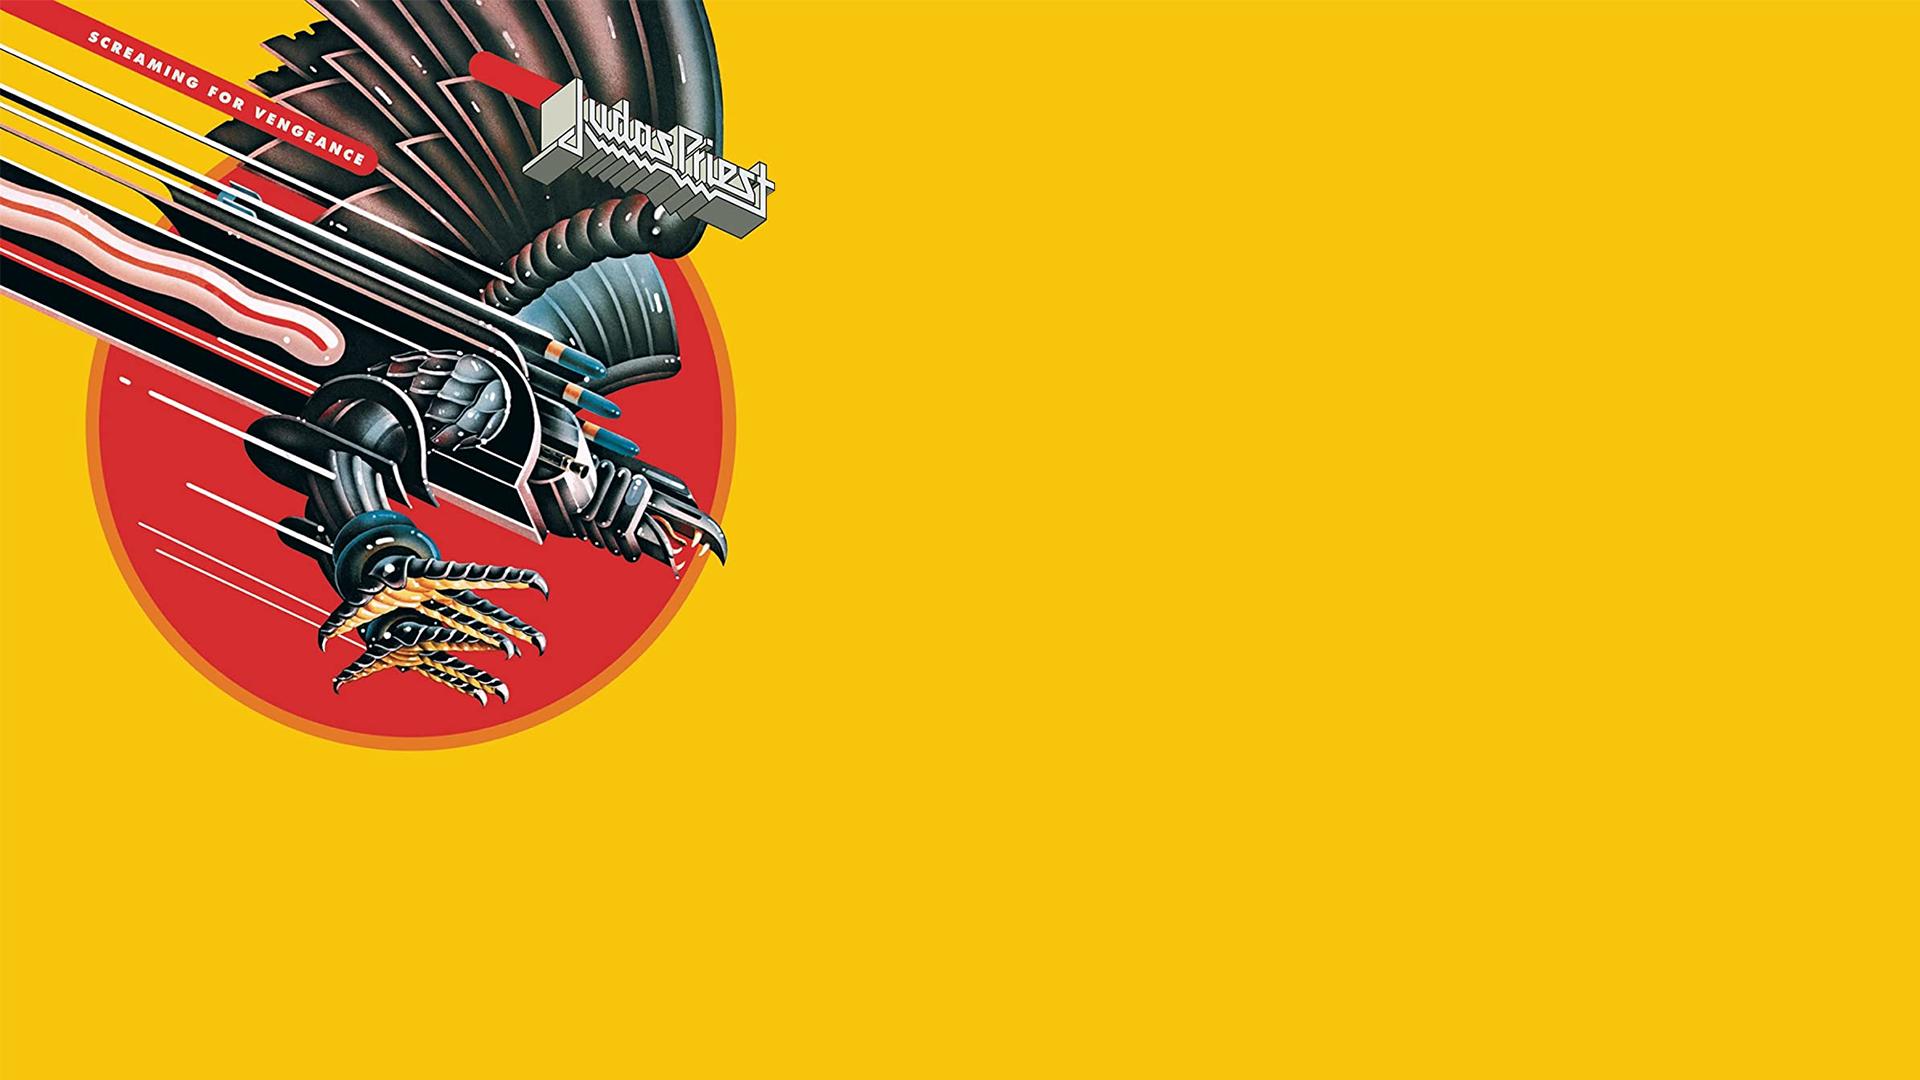 HD wallpaper, Yellow Background, Simple Background, Band, Birds, Judas Priest, Metal Band, Album Covers